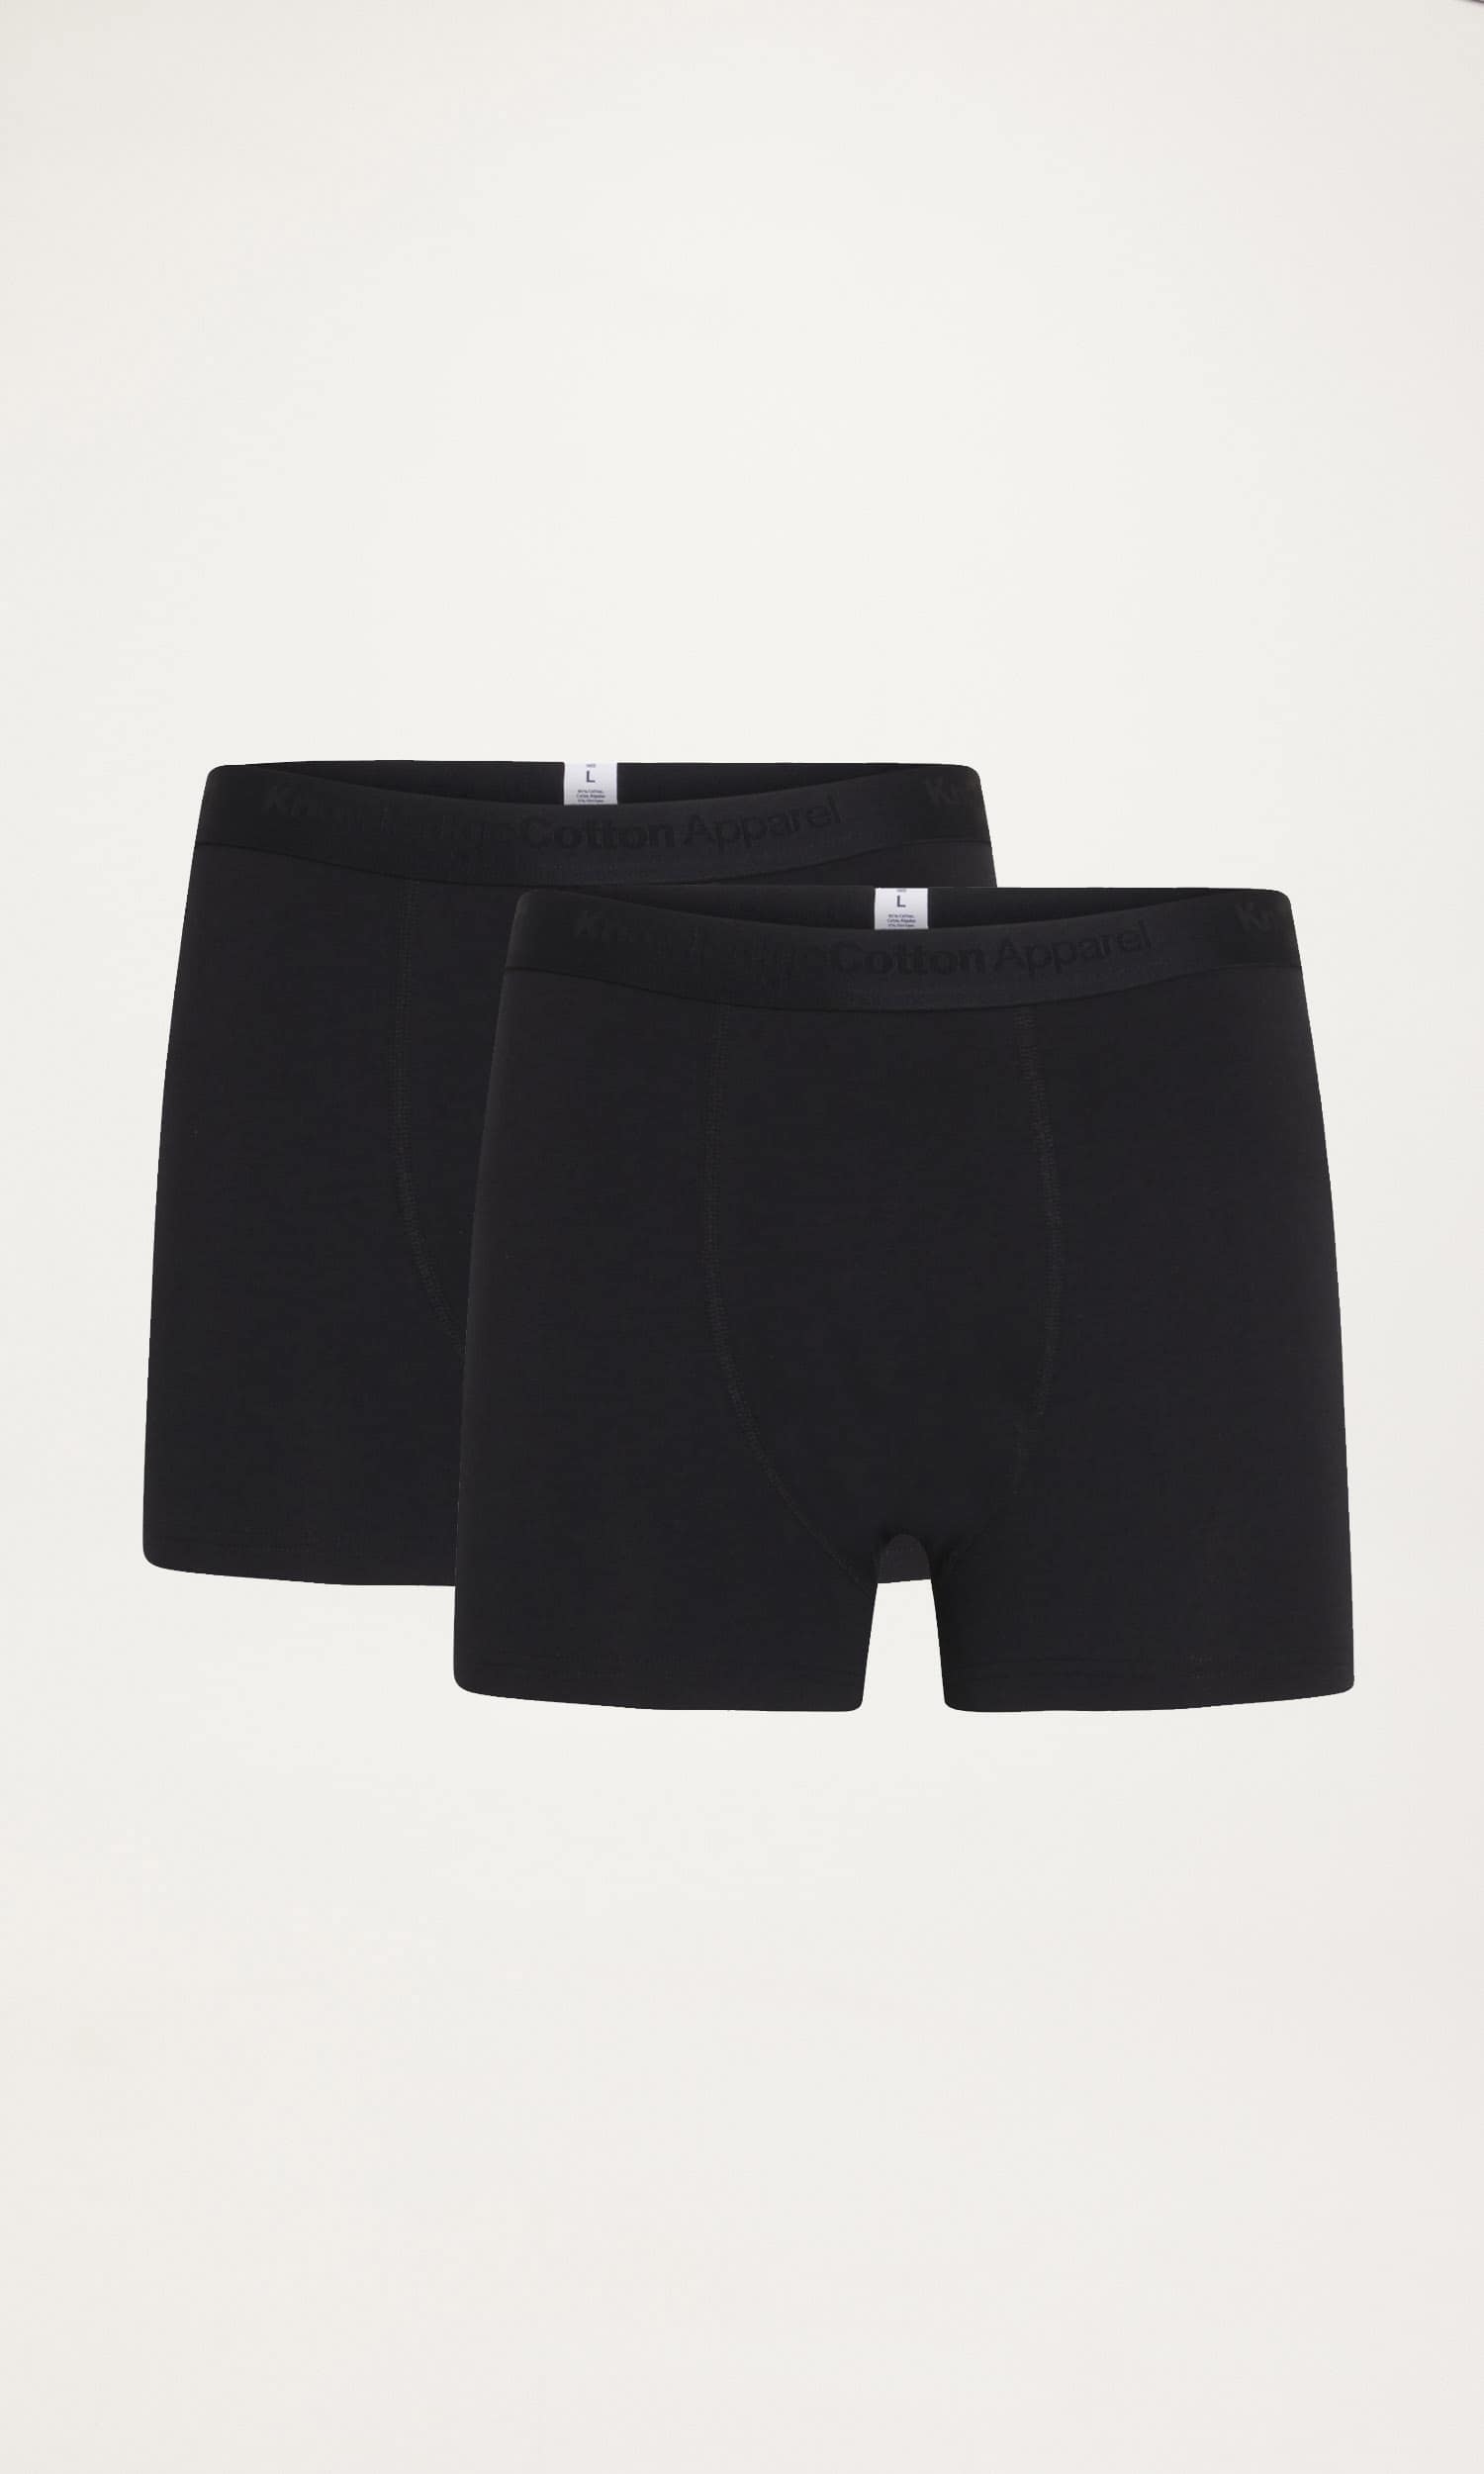 Buy 2 pack underwear - Black Jet - from KnowledgeCotton Apparel®